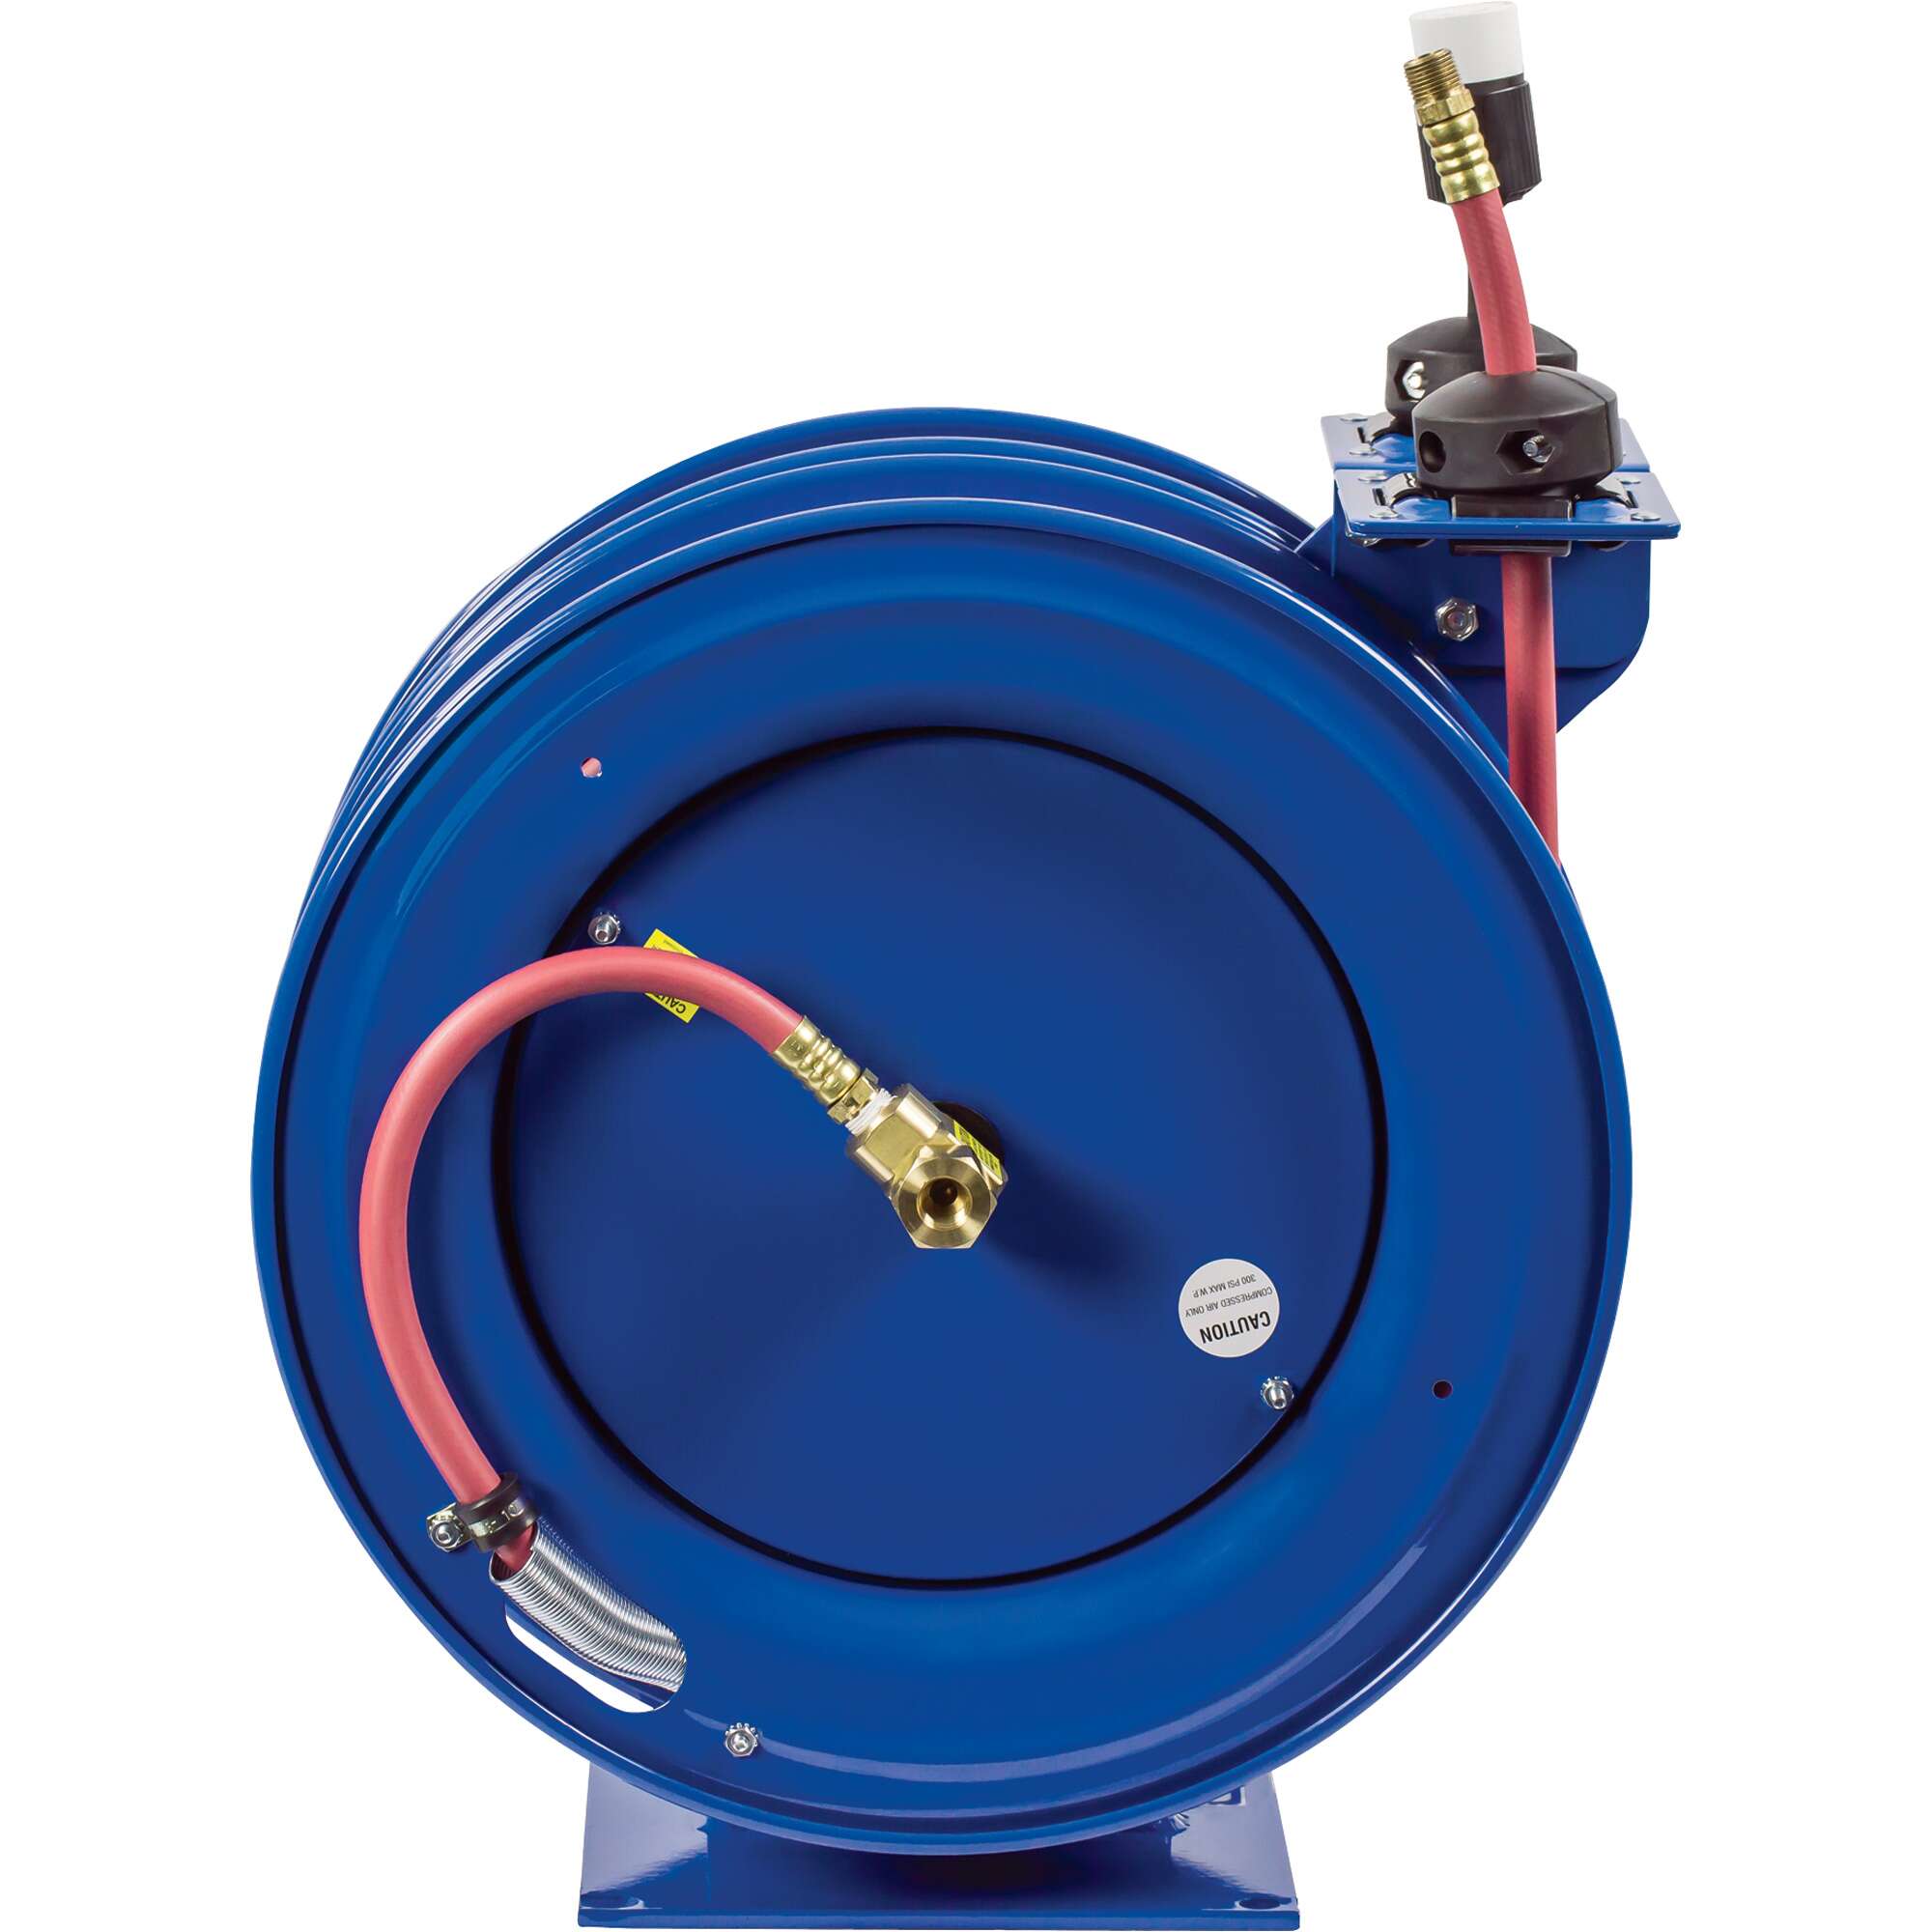 Coxreels Combo Air and Electric Hose Reel with Outlet Attachment